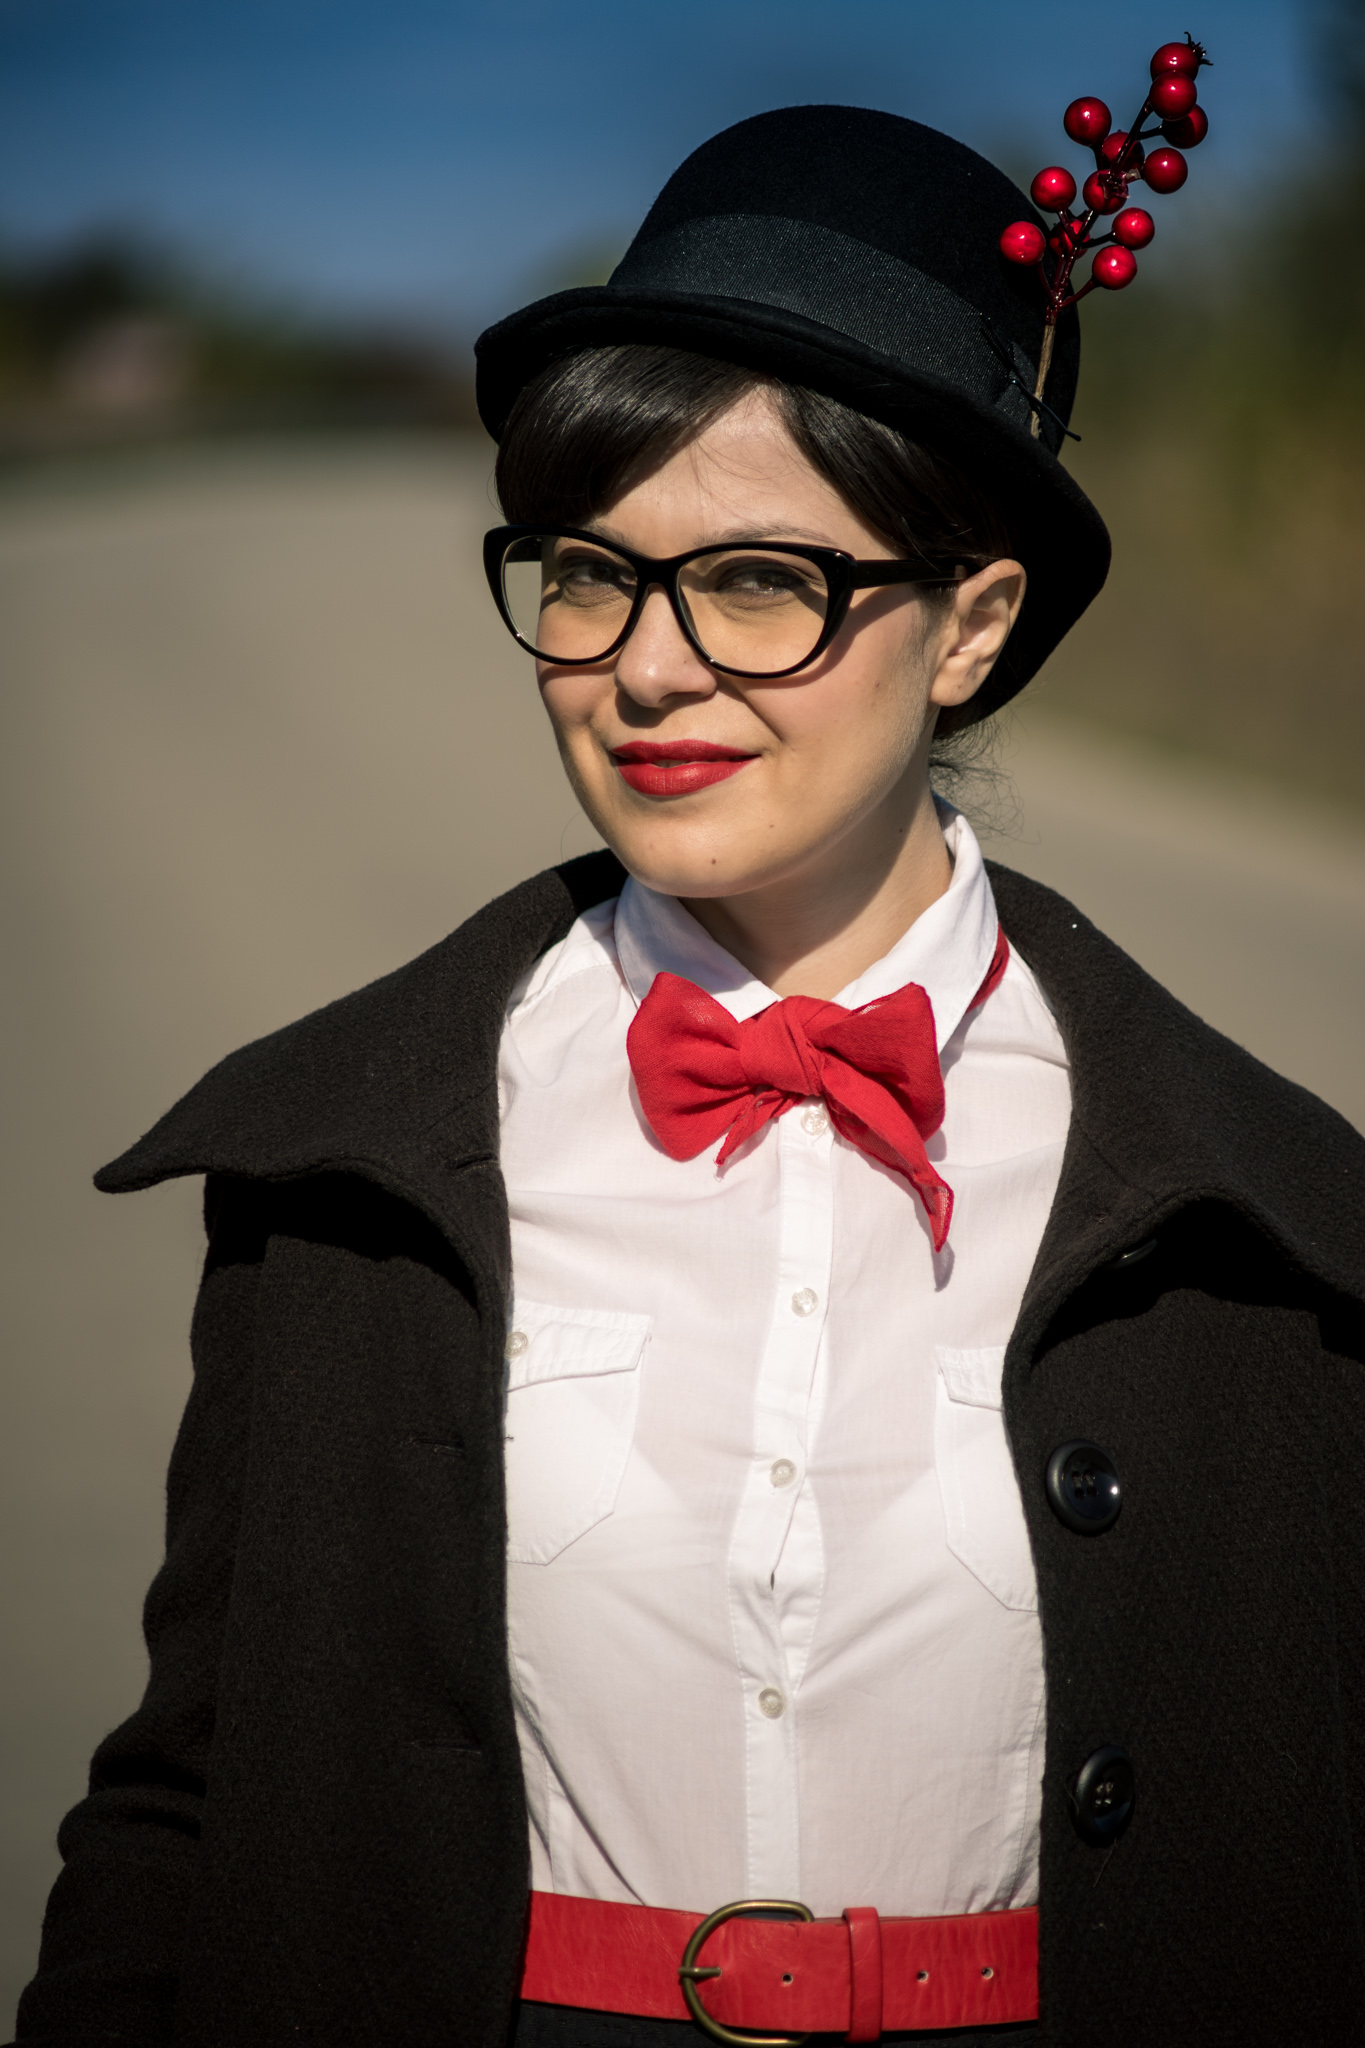 Miss Green has a new home: Easy DIY Halloween Costume - Mary Poppins